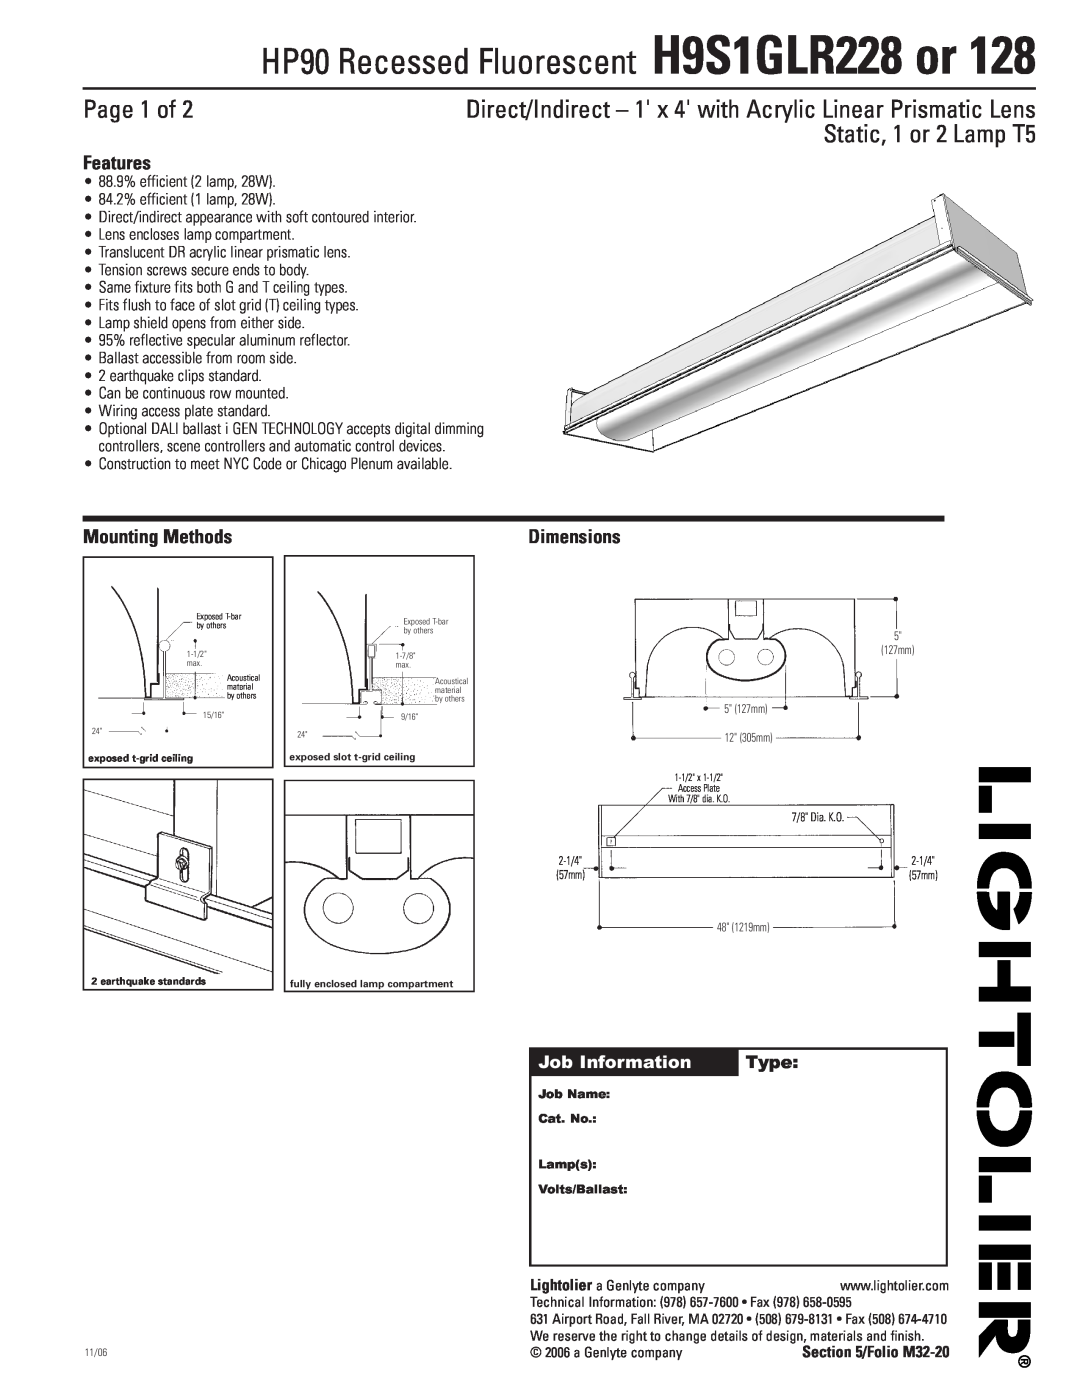 Lightolier H9S1GLR128 dimensions Page 1 of, Static, 1 or 2 Lamp T5, Features, Mounting Methods, Job Information, Type 